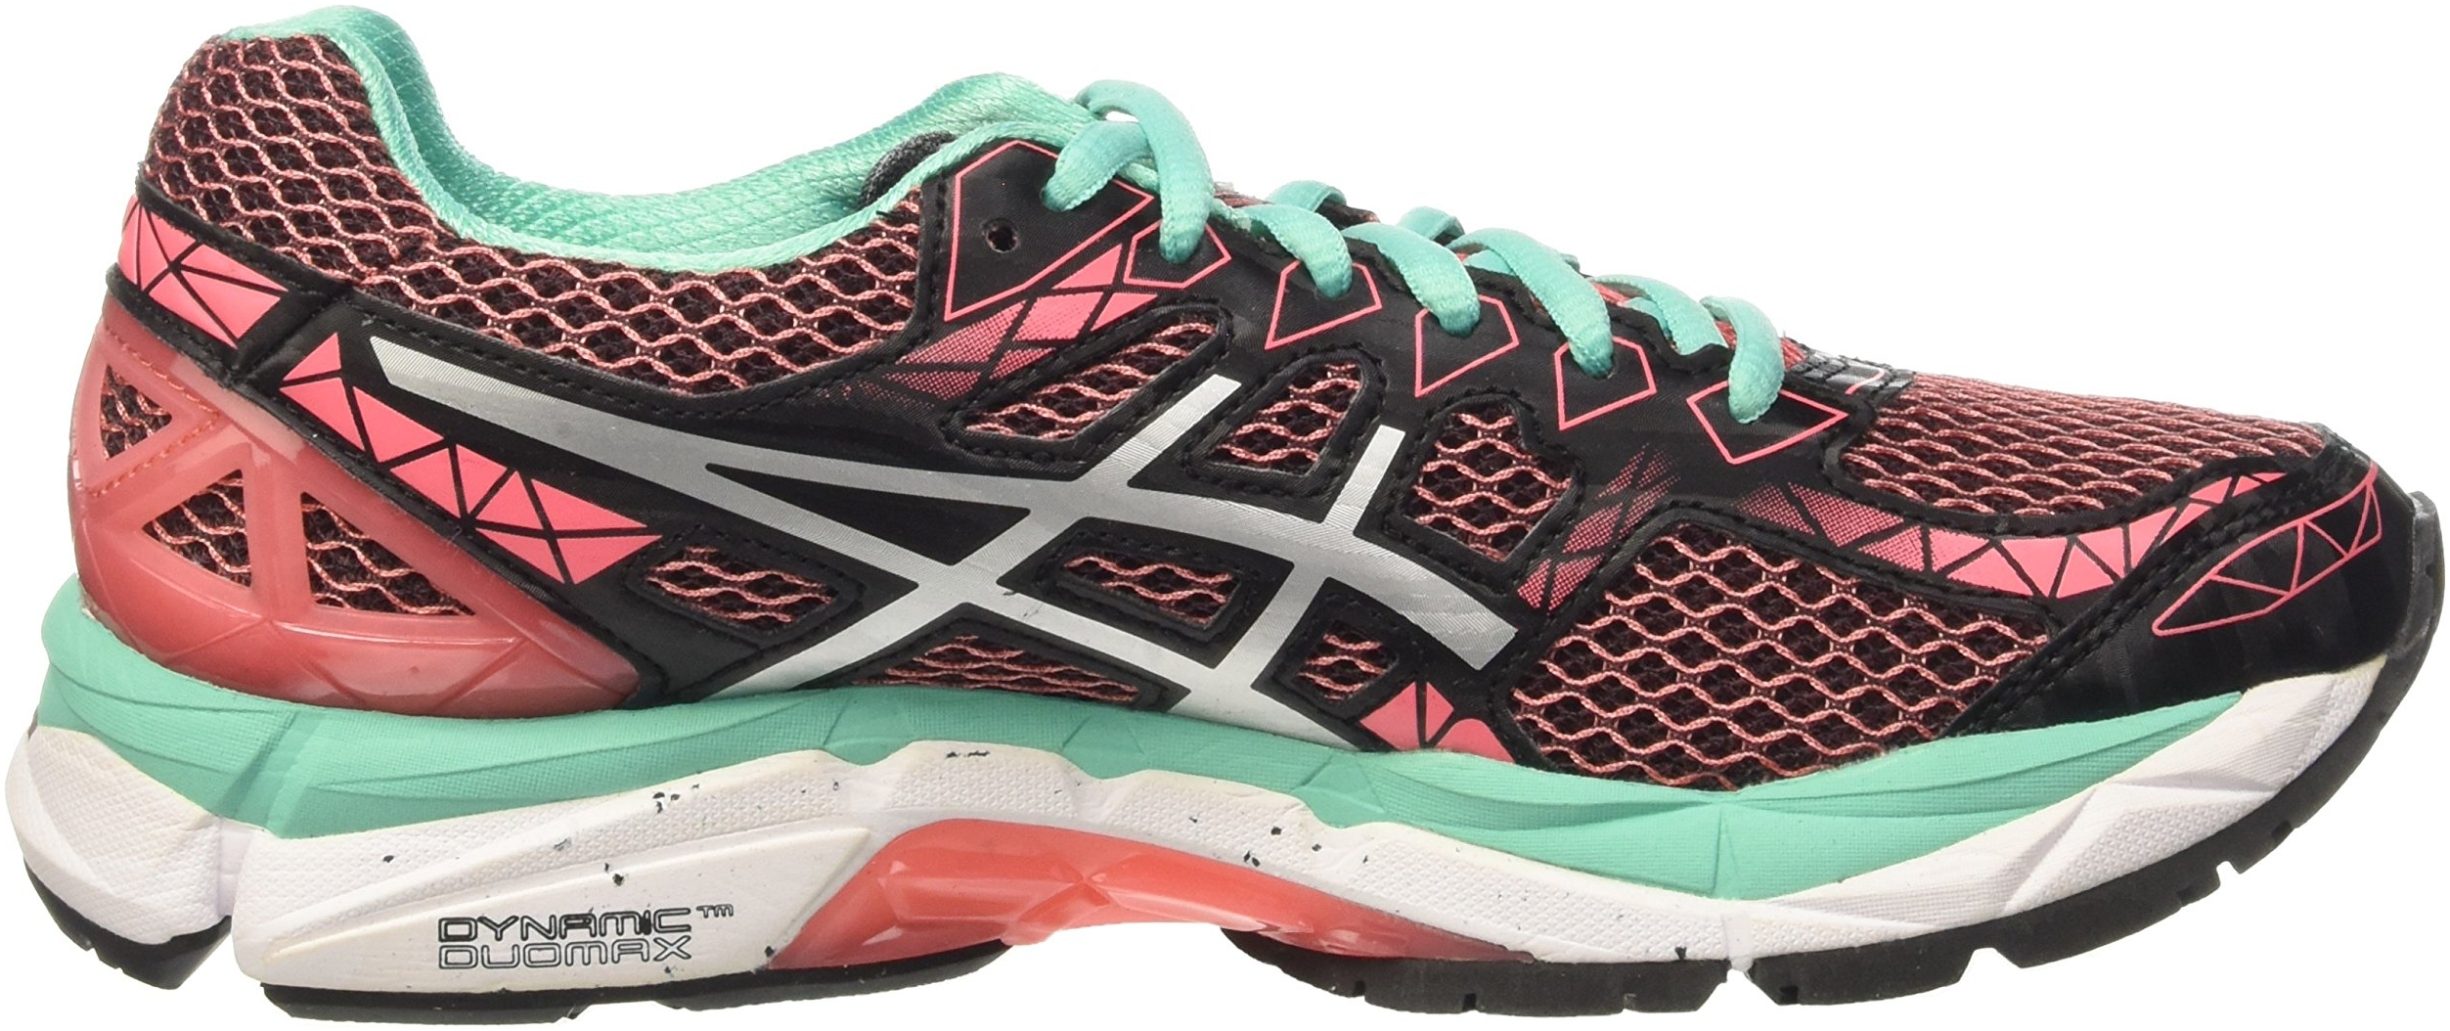 Only $100 + Review of Asics GT 3000 4 